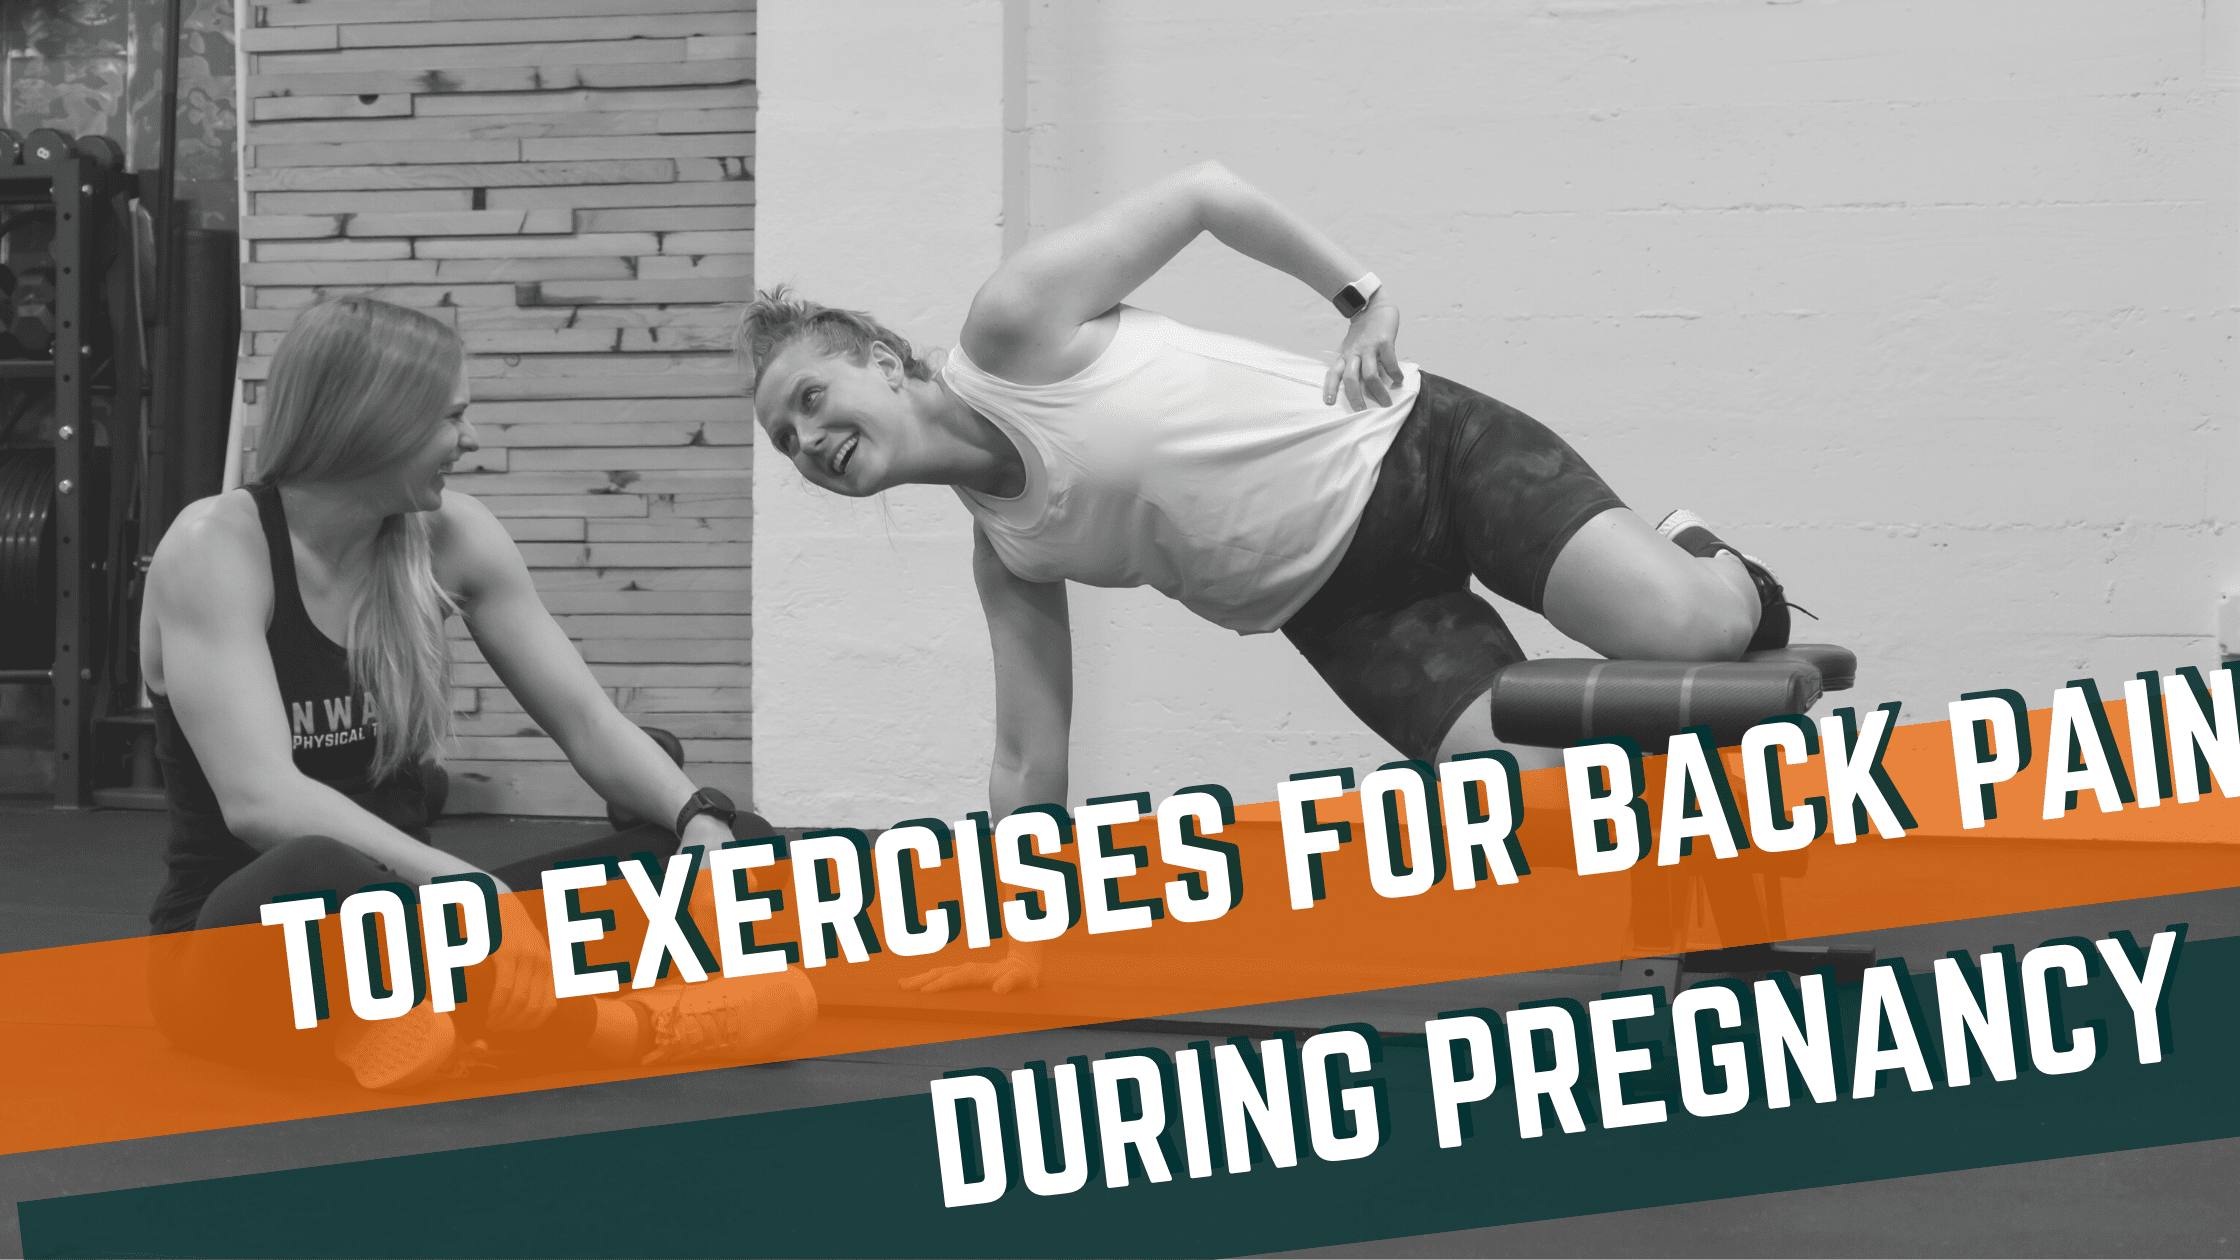 Top 5 Exercises for Back Pain During Pregnancy